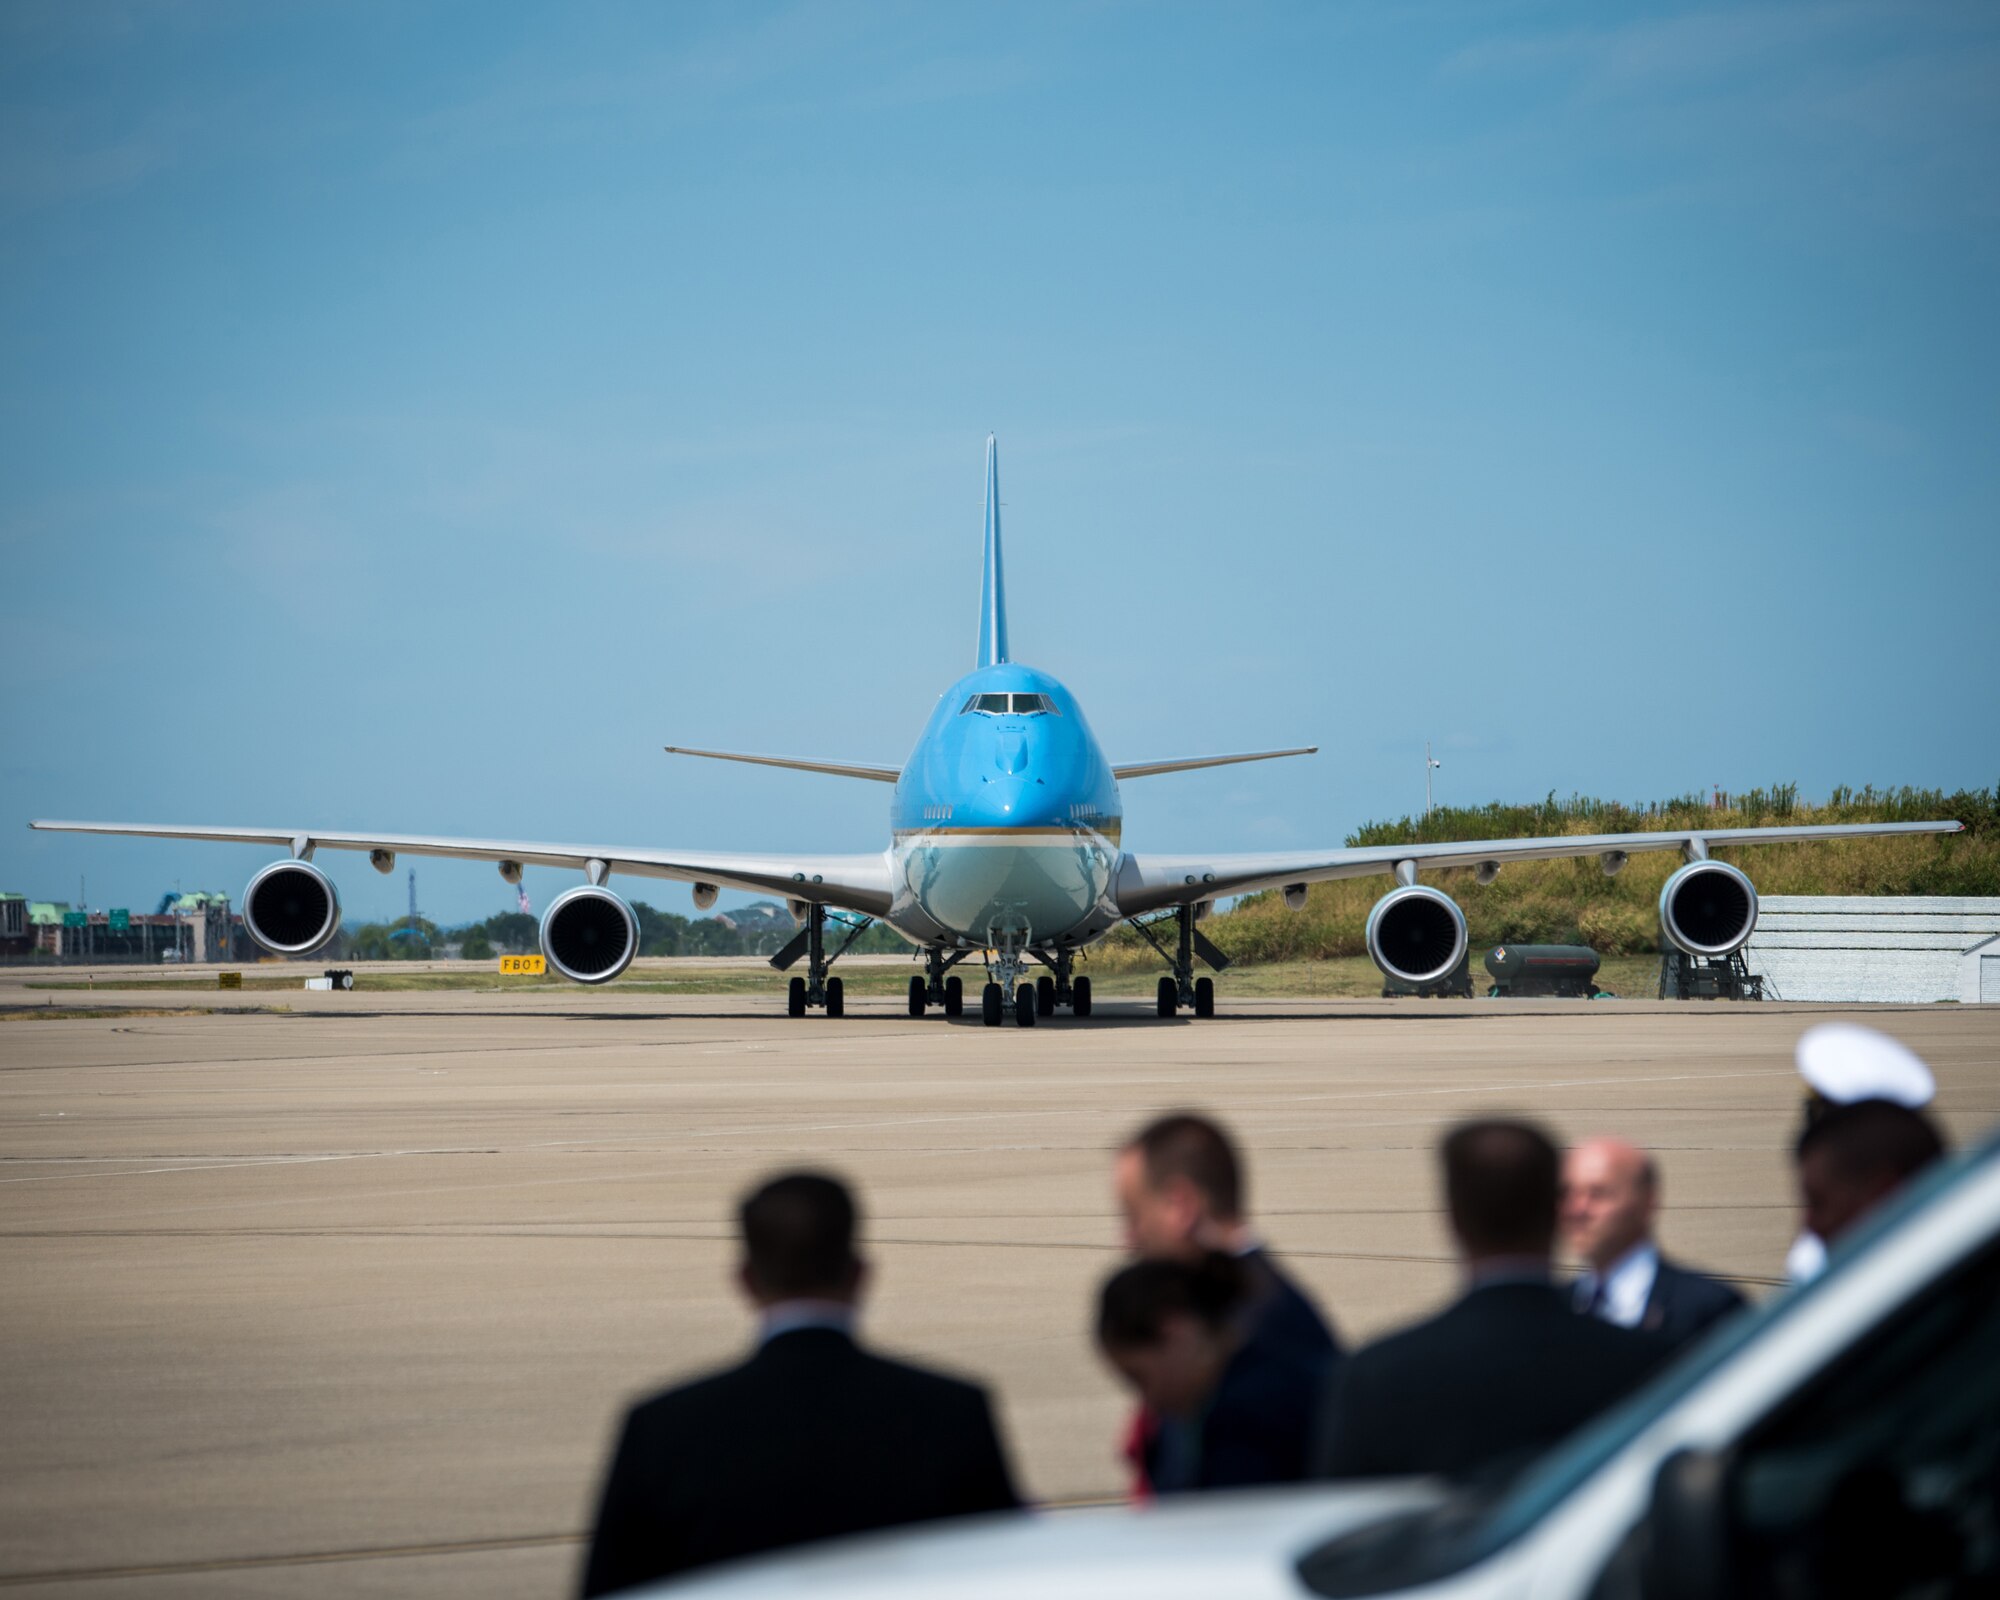 President Donald Trump arrives at the Kentucky Air National Guard Base in Louisville, Ky., aboard Air Force One on Aug. 21, 2019. Trump was in town to speak at an AMVETS convention and attend a fundraiser for Kentucky Gov. Matt Bevin’s re-election campaign. (U.S. Air National Guard photo by Airman 1st Class Chloe Ochs)